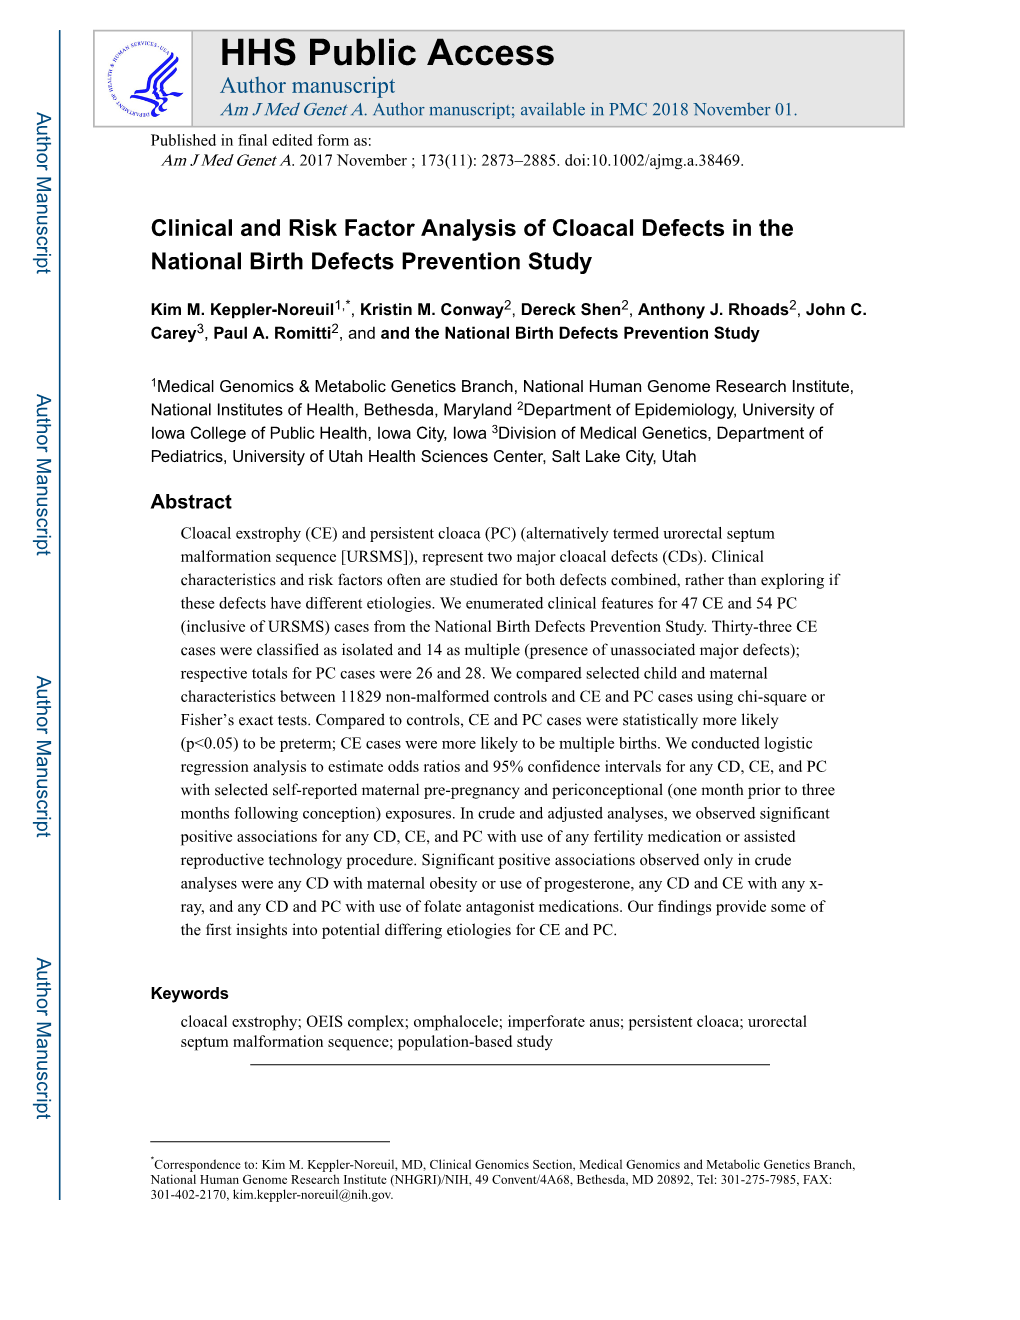 Clinical and Risk Factor Analysis of Cloacal Defects in the National Birth Defects Prevention Study